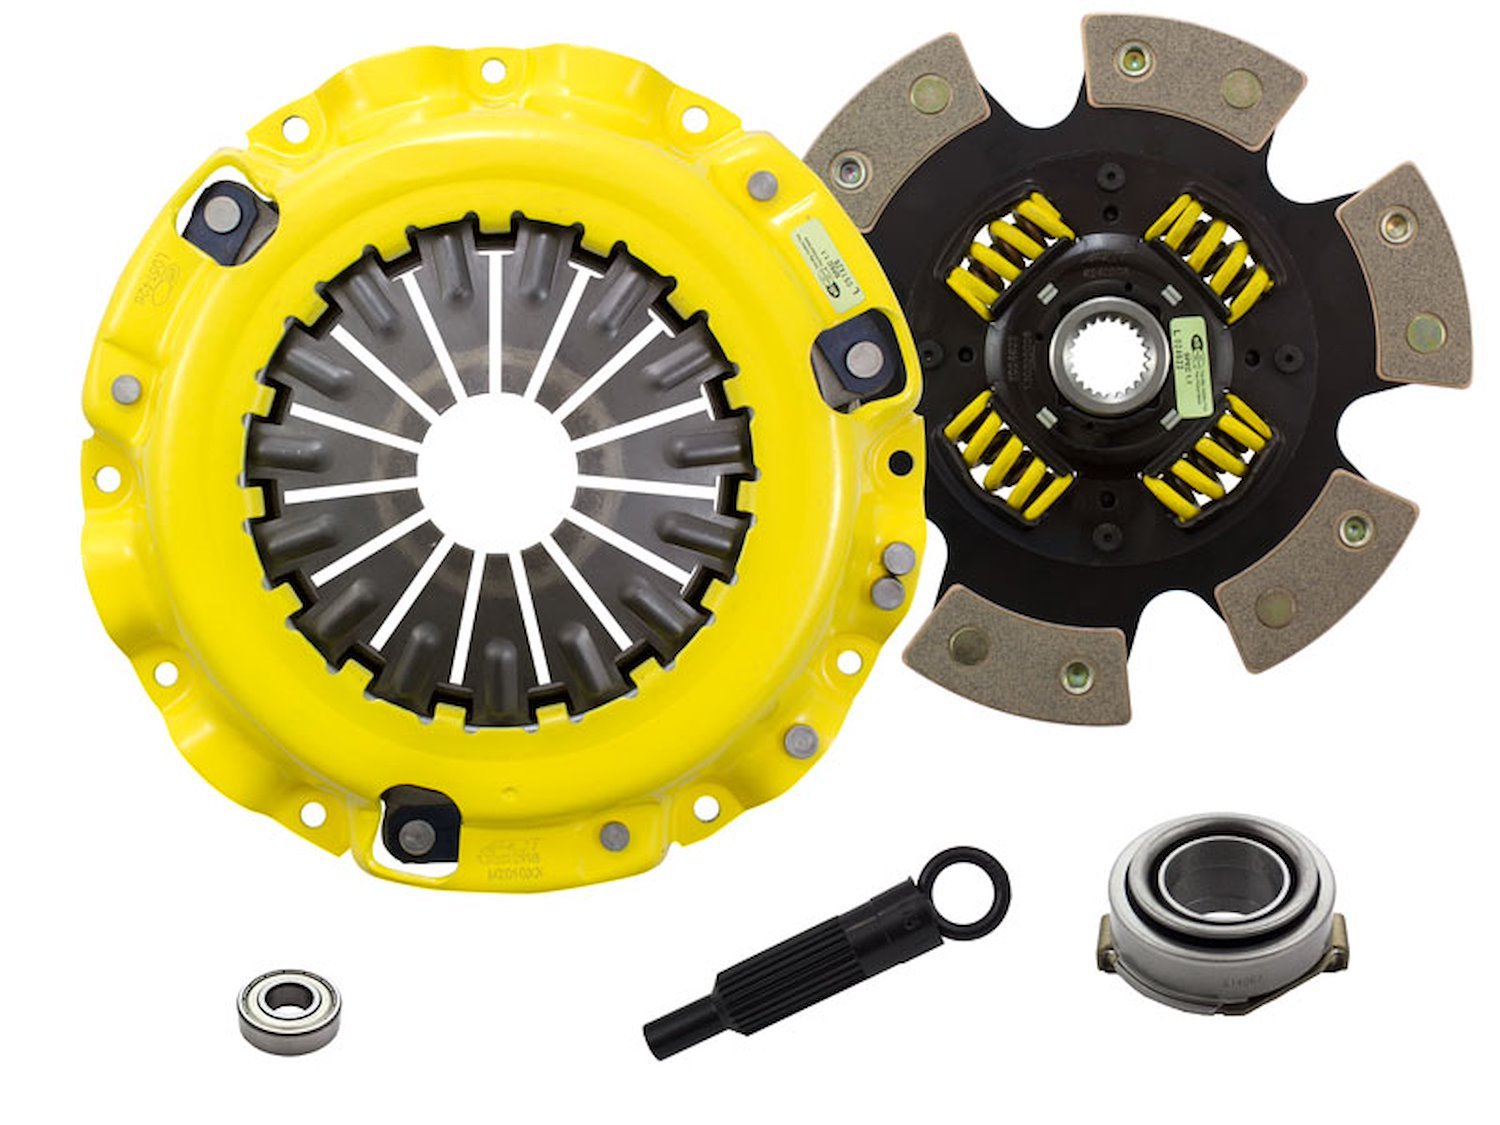 MaXX/Race Sprung 6-Pad Transmission Clutch Kit Fits Select Ford/Lincoln/Mercury/Mazda